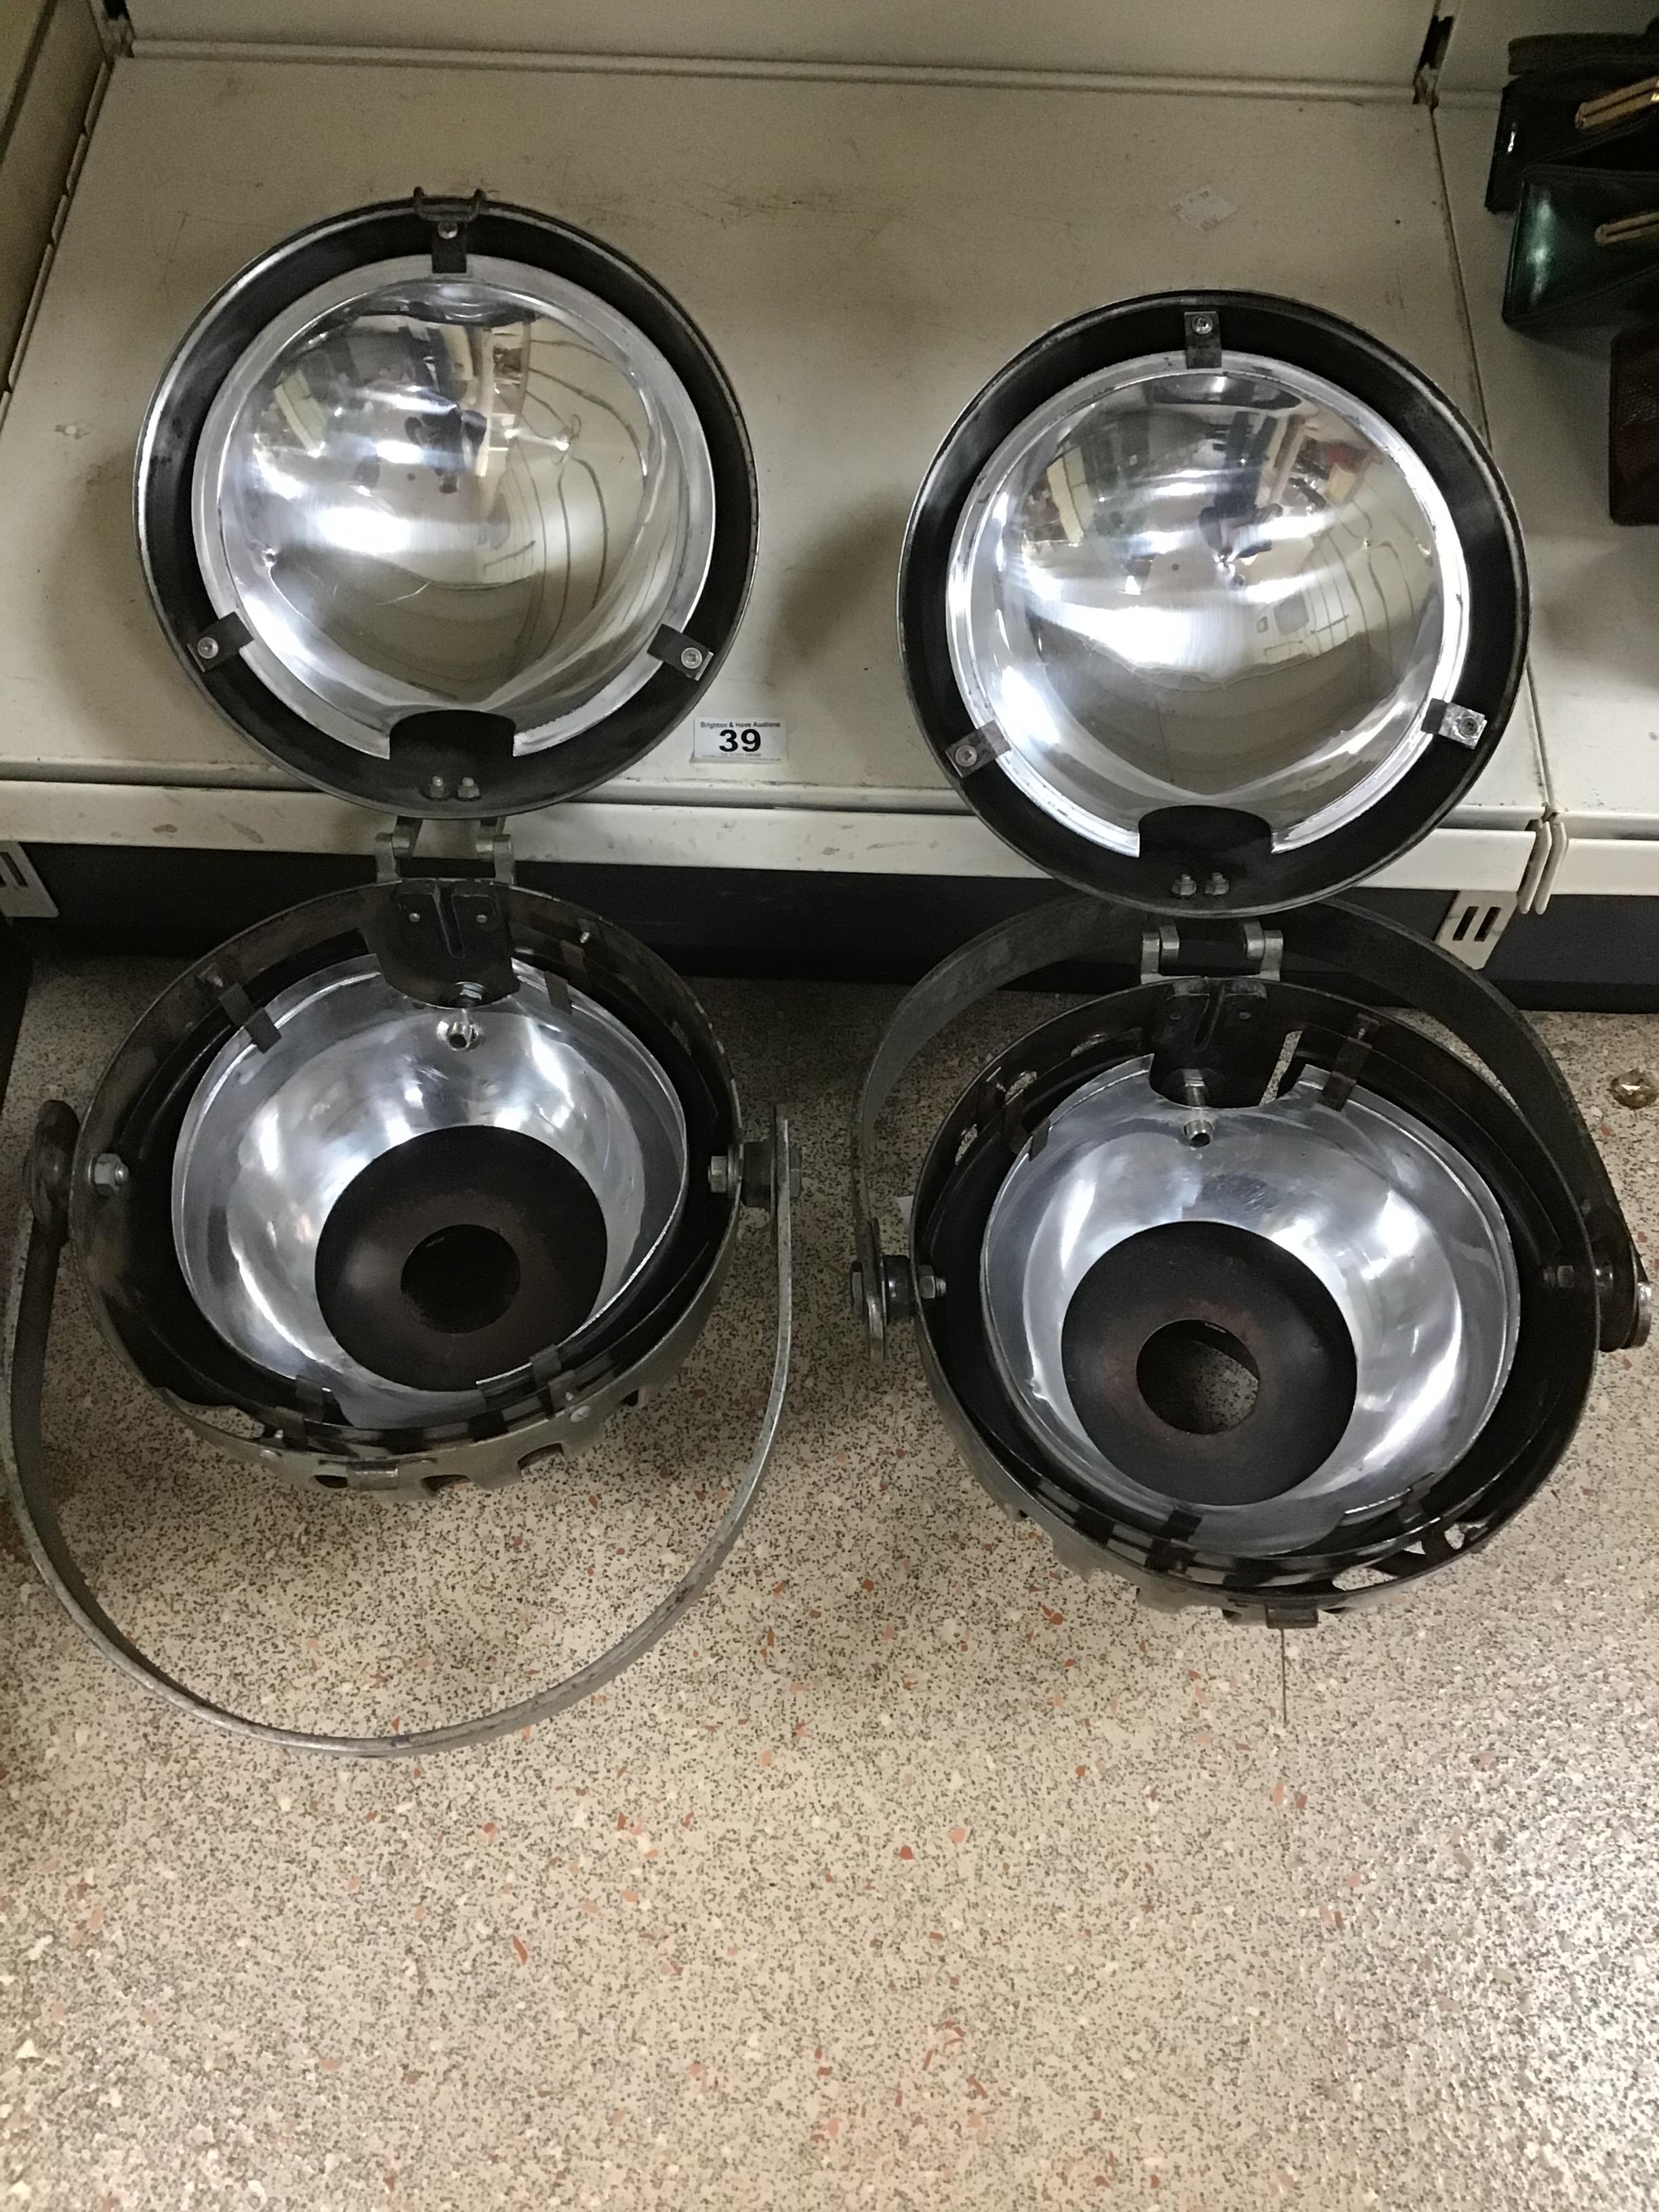 A PAIR OF 1960'S THEATRE LIGHTS BY FURSE, APPROXIMATELY 28CM HIGH - Image 2 of 5